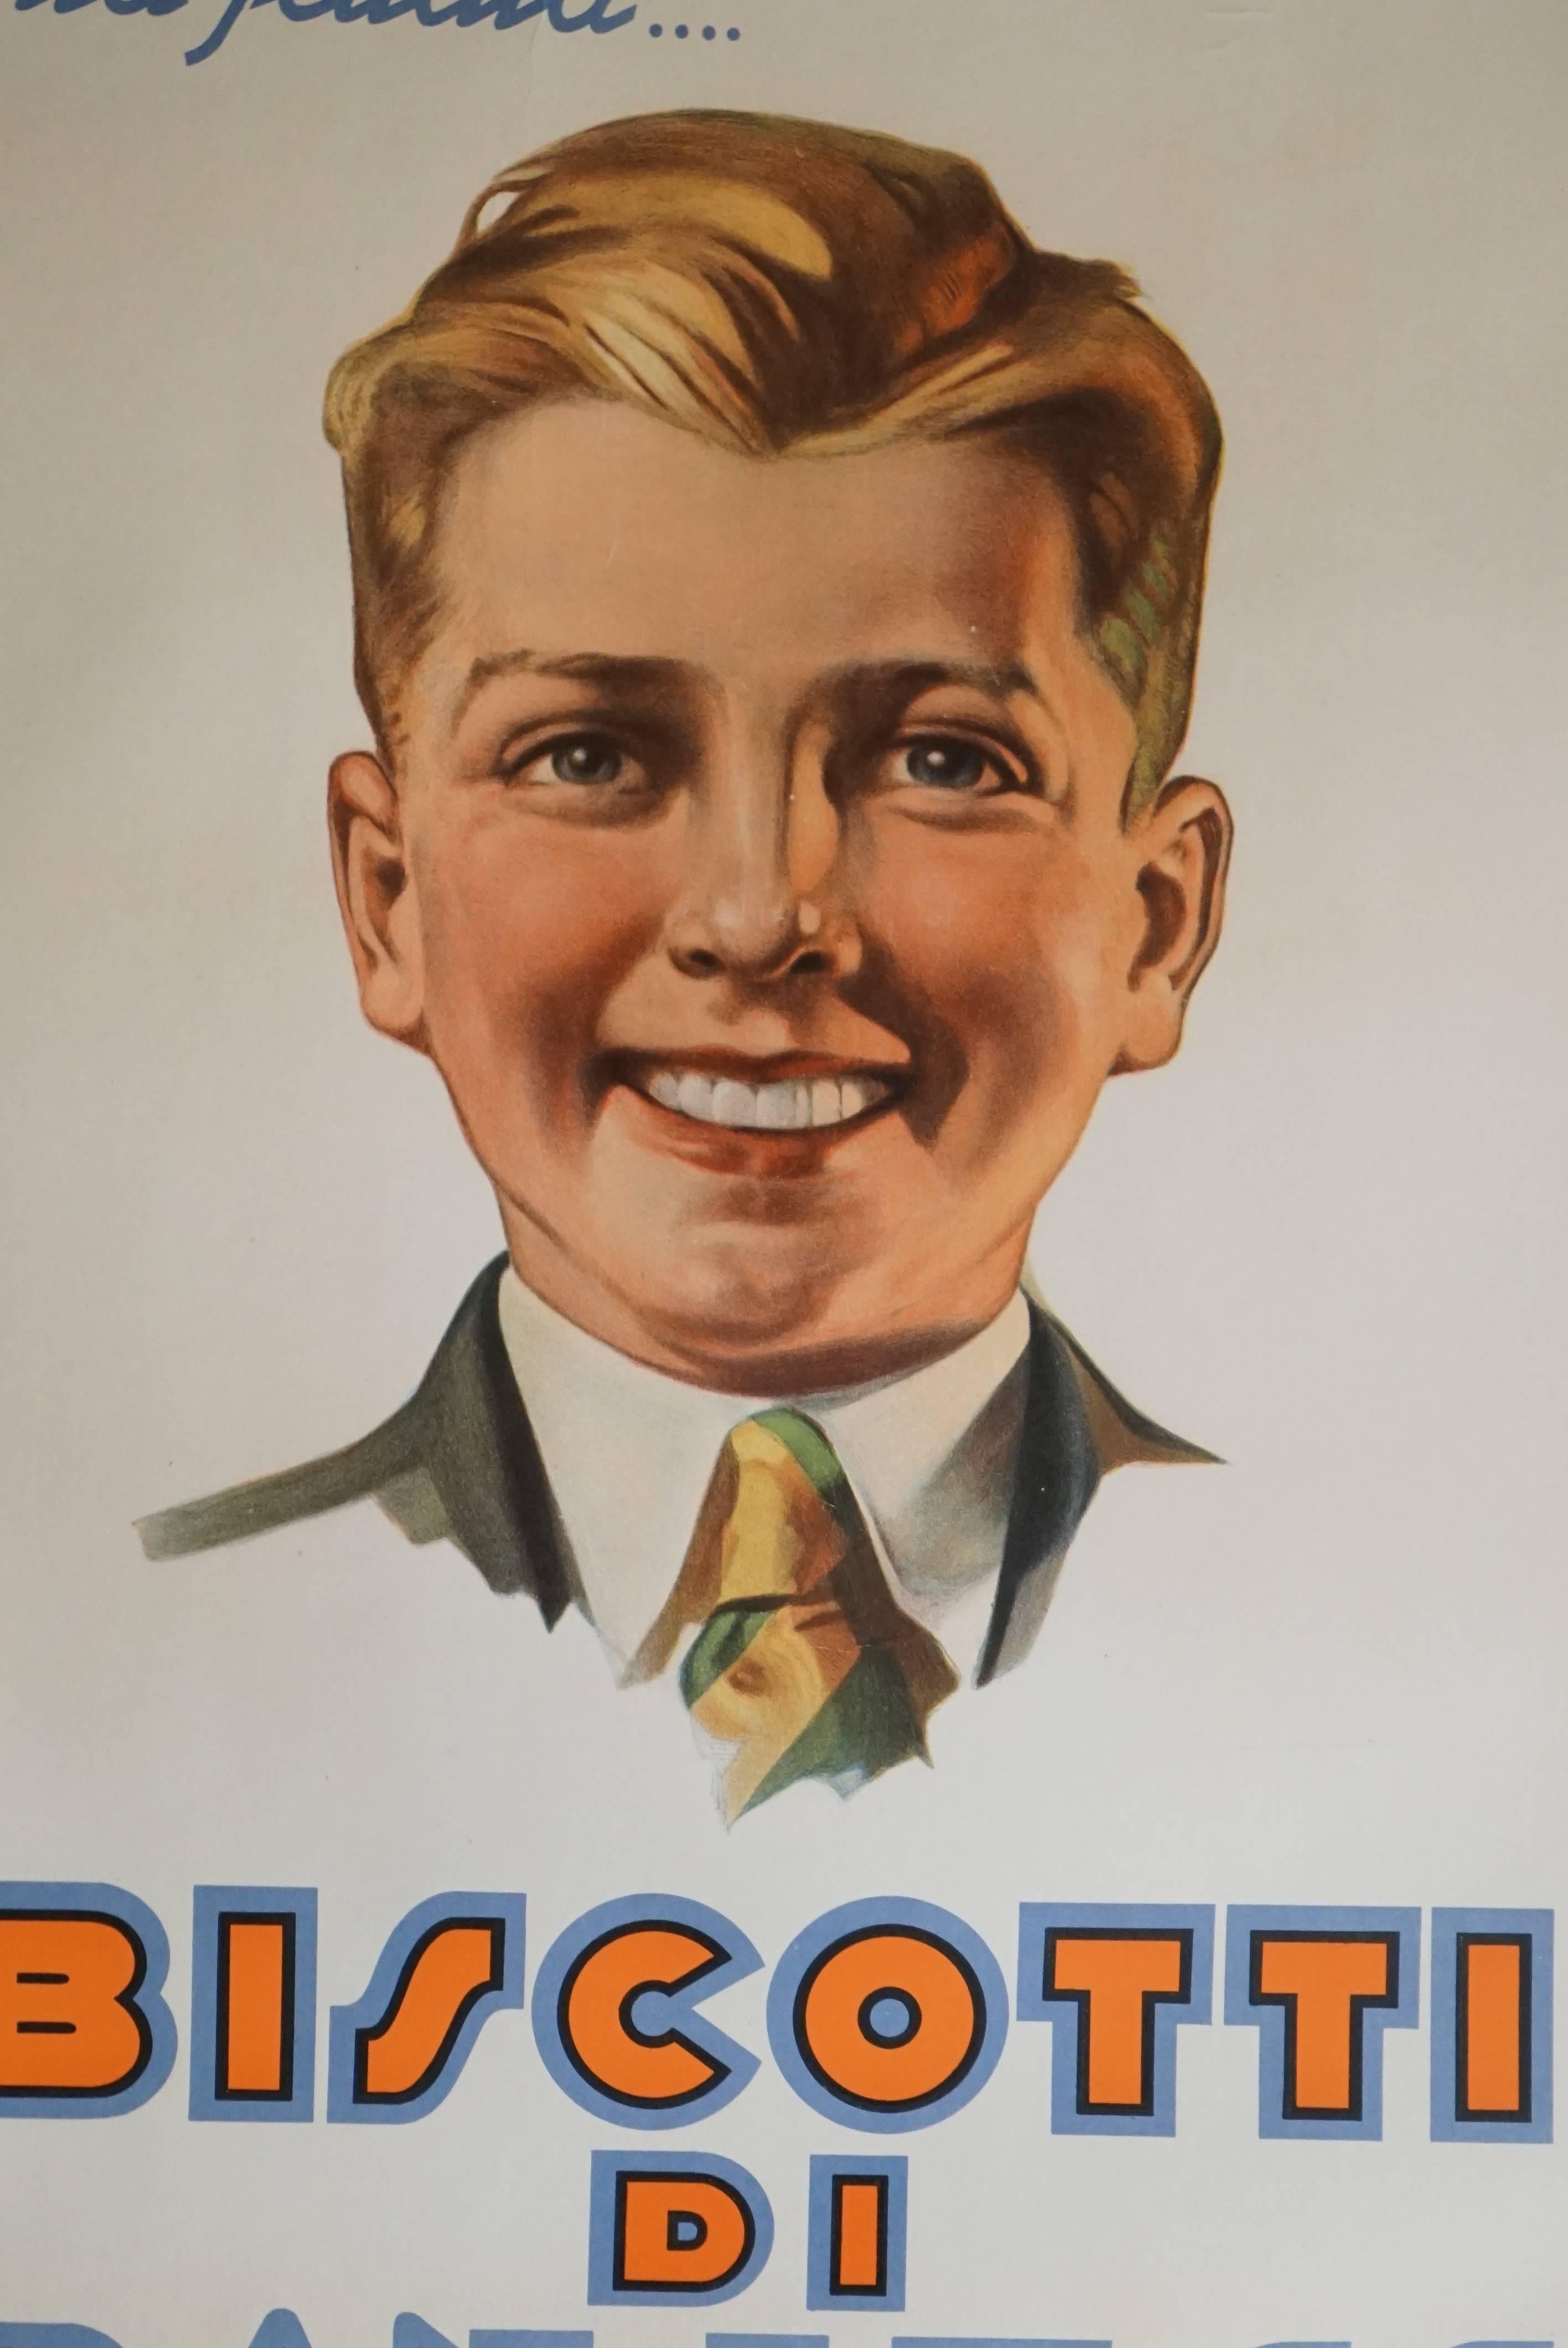 Large Poster of Young Man Who Enjoys Biscotti, circa 1920 In Excellent Condition For Sale In Hudson, NY